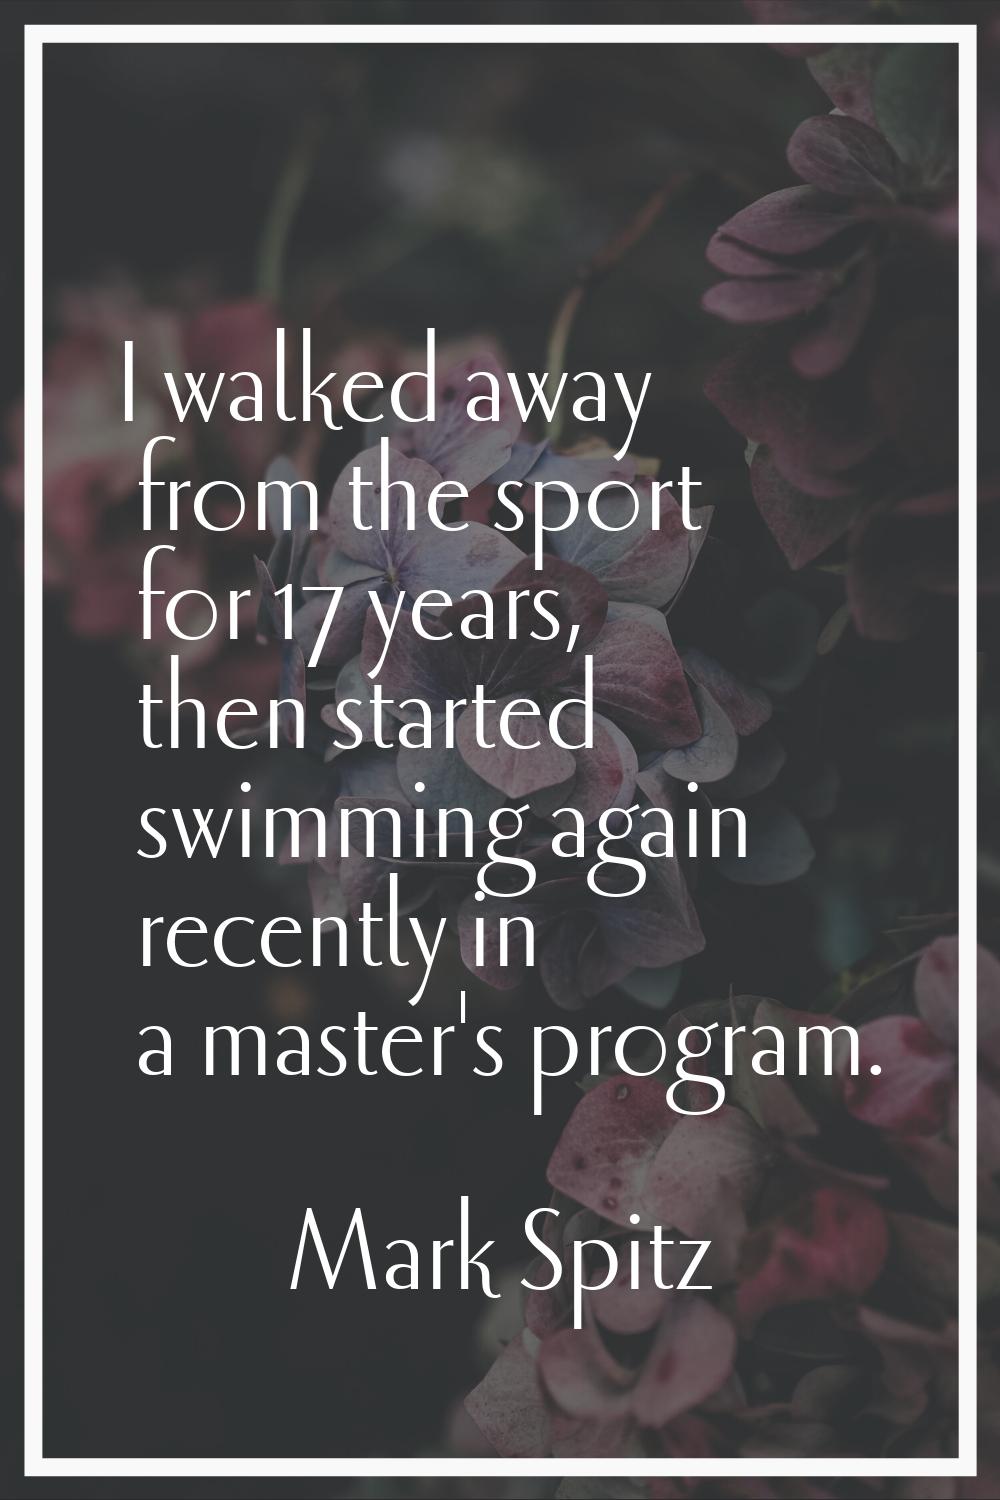 I walked away from the sport for 17 years, then started swimming again recently in a master's progr